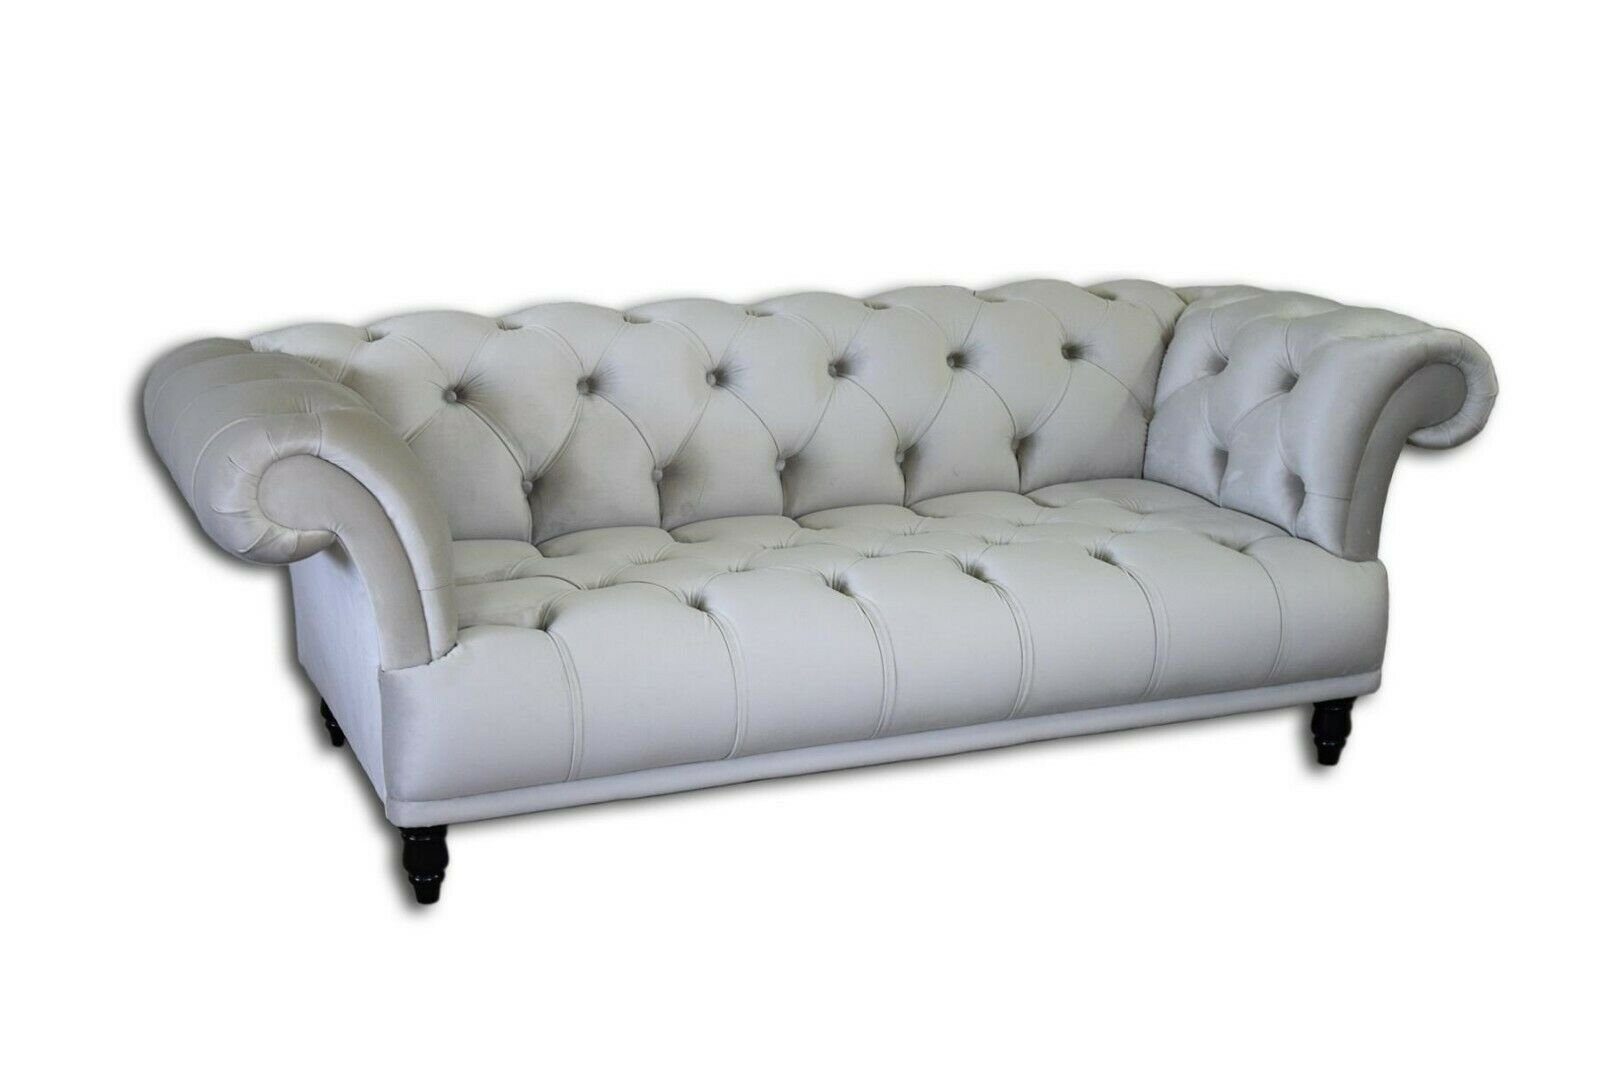 3- 3-Sitzer Design Sitzer JVmoebel Chesterfield Klassik in Sofa, Weiß Couch Made Couch Europe Polster